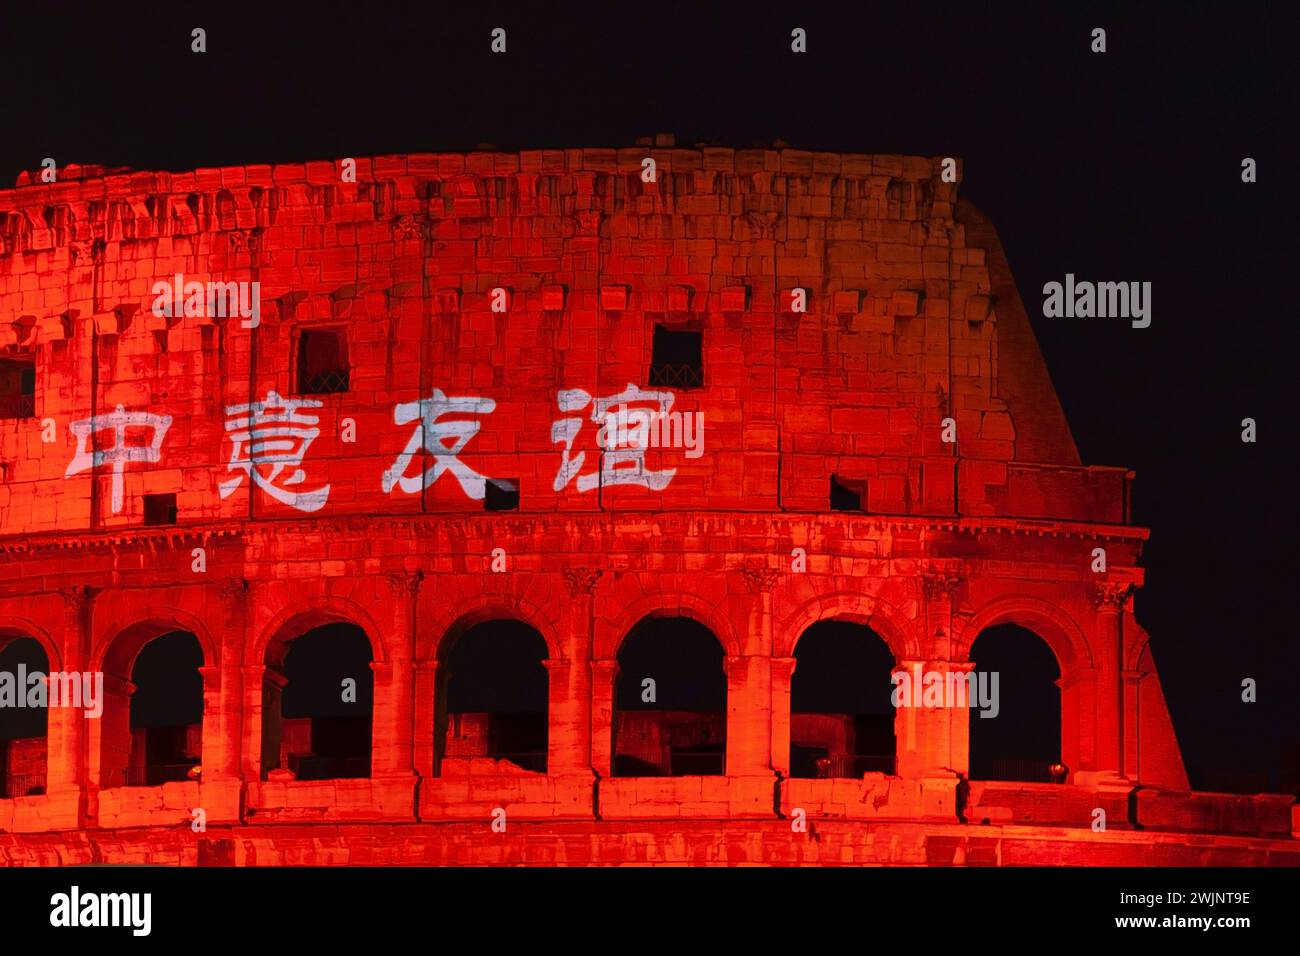 Colosseum was lit up in red with a Chinese writing, on the occasion of Prime Minister Wen Jiabao's official visit to Rome in 2010, Italy, European Union Stock Photo